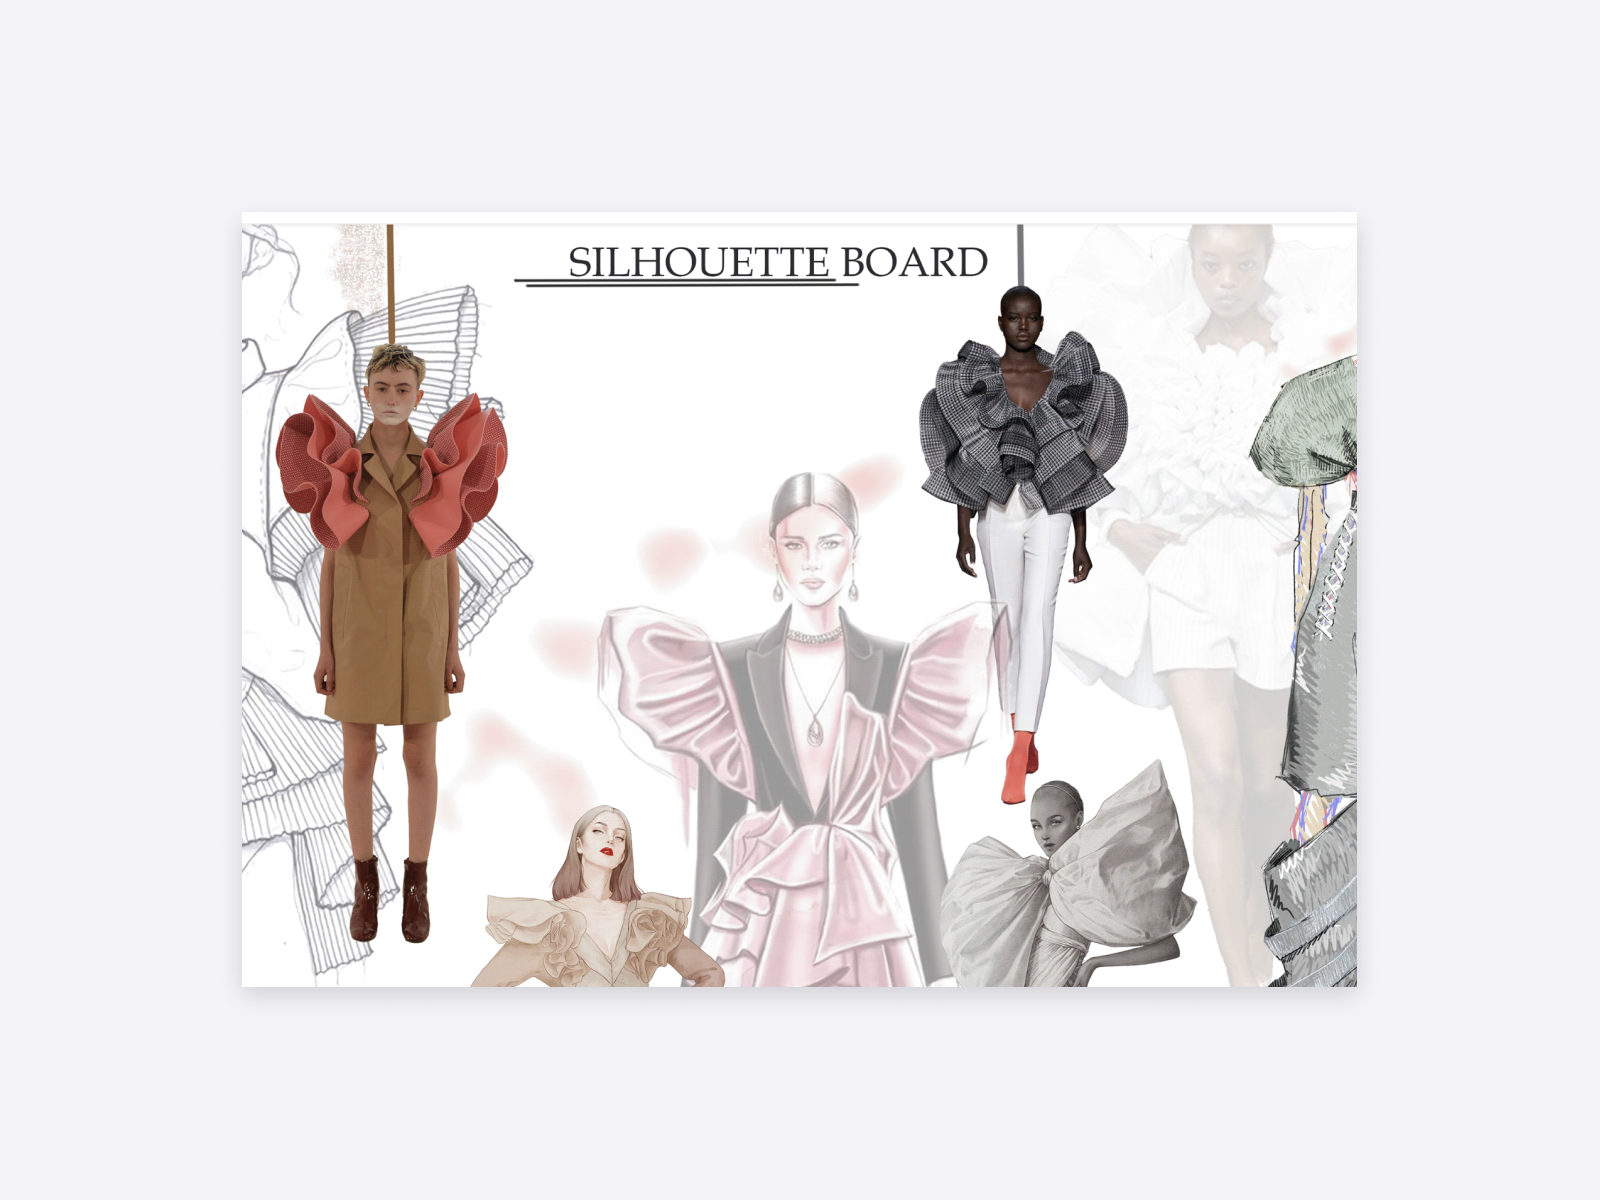 Sandeep's silhouette board mixes fashion sketches and models from the catwalk.